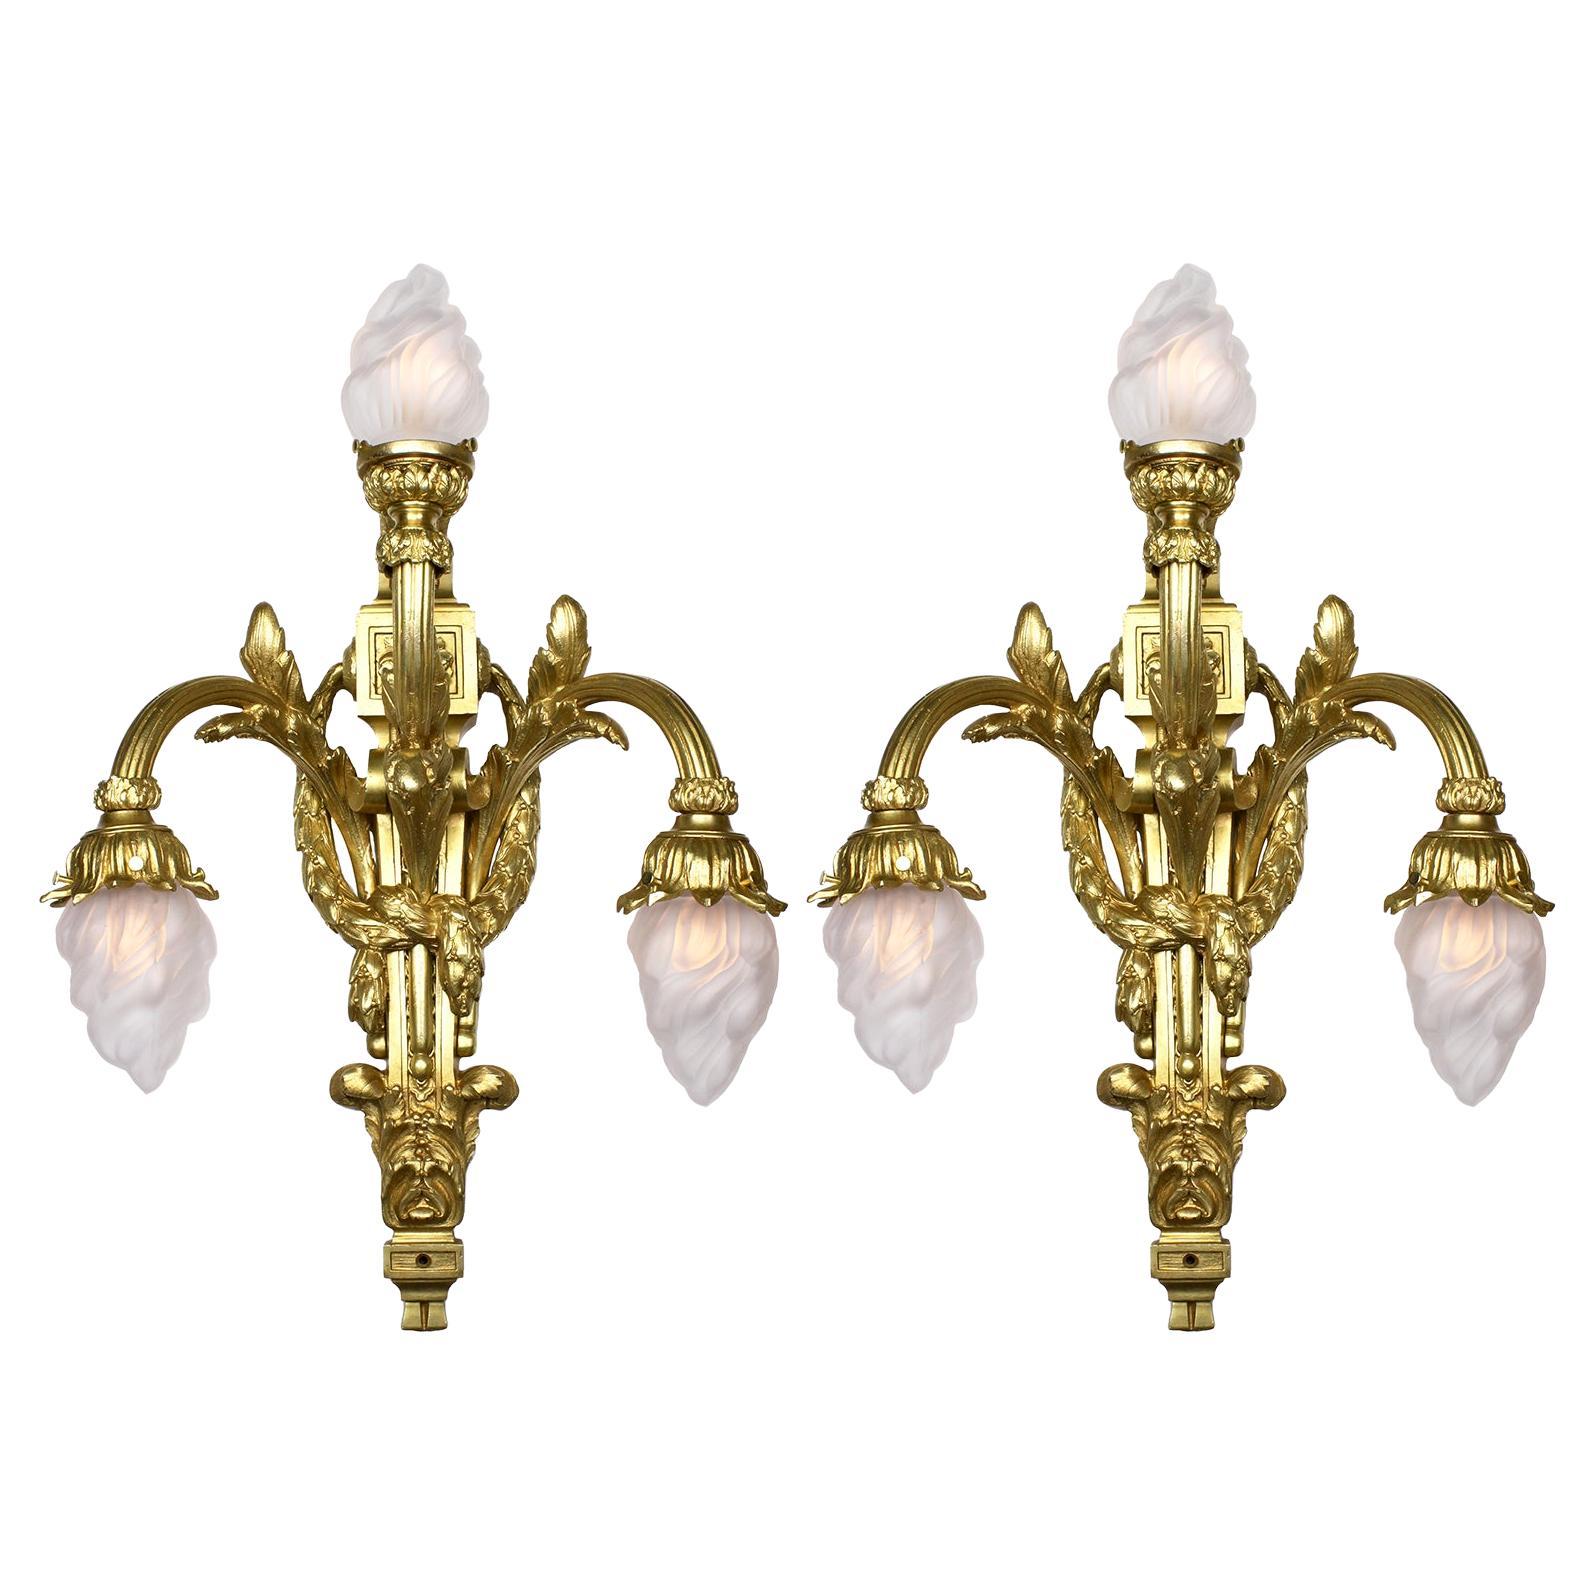 Pair of French 19th/20th Century Empire Style 3-Light Gilt-Bronze Wall Sconces For Sale